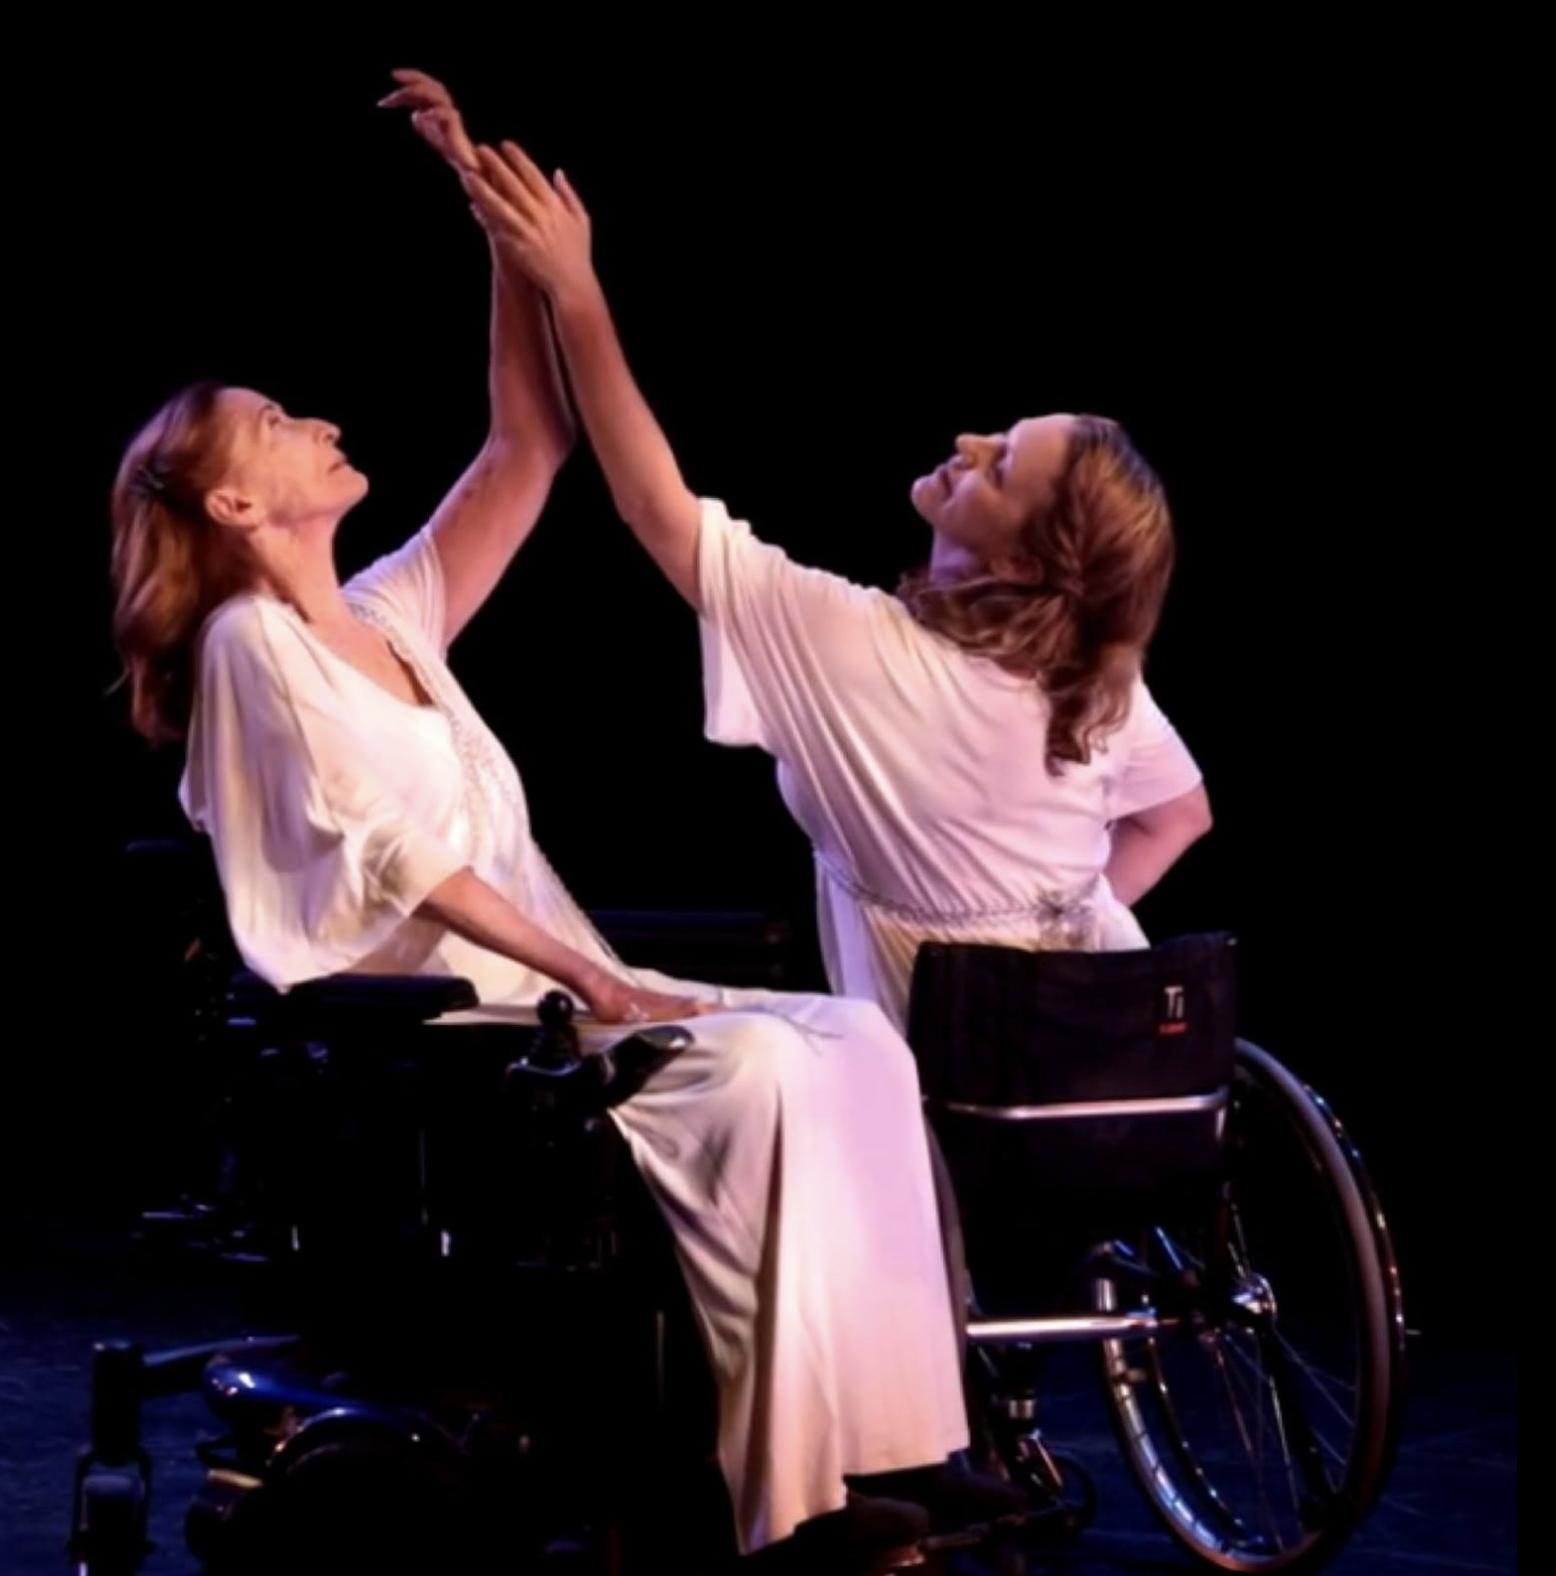 Momenta Dance Company's Facebook profile picture of two women wearing flowing white dresses, both in wheelchairs, facing one another with arms gracefully lifted.